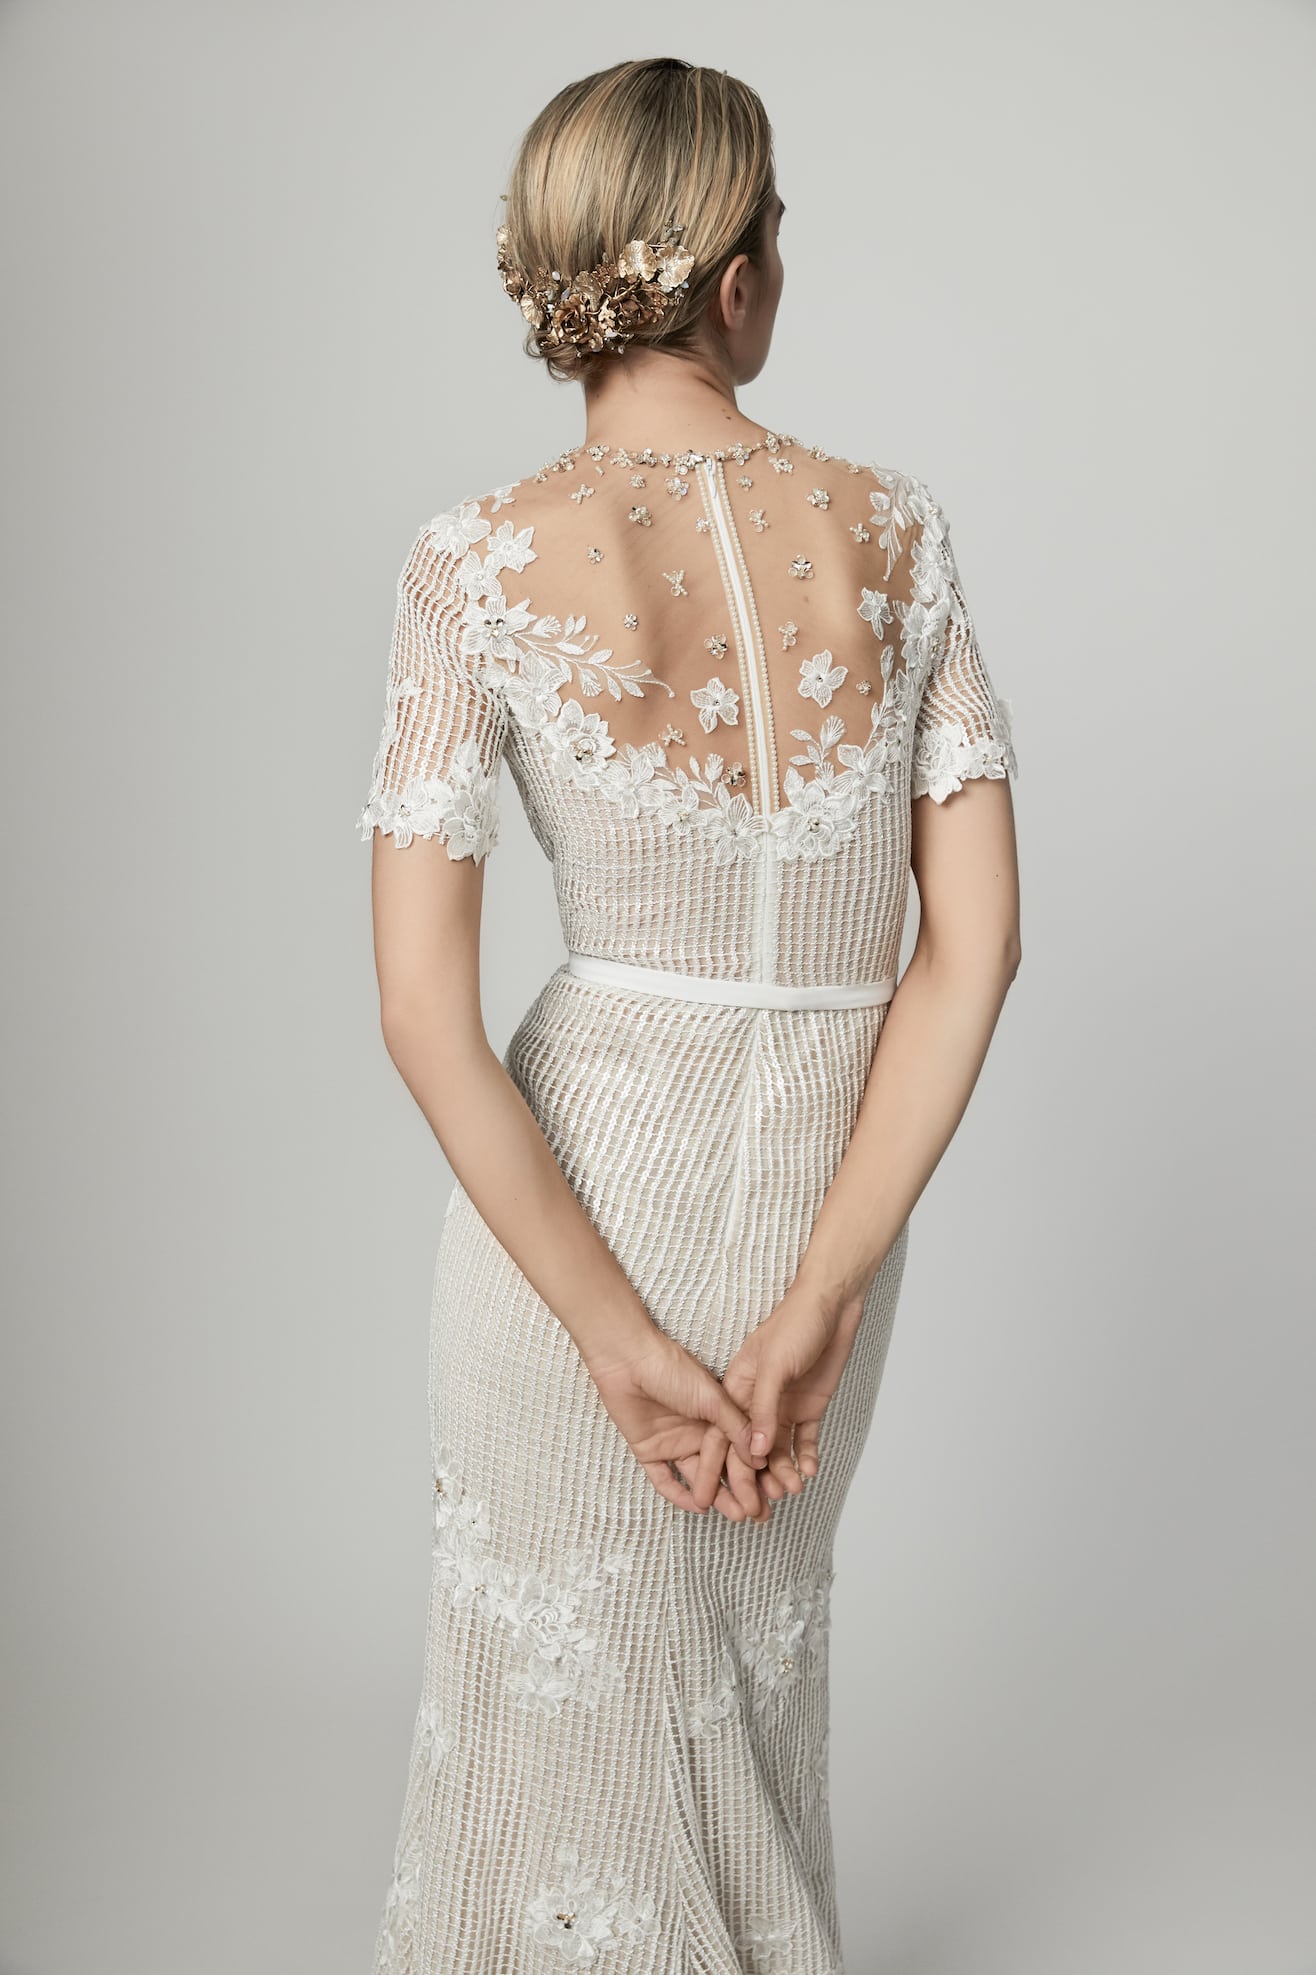 A woman in a mesh style dress with illusion back with floral appliqués from Our Story Bridal with her back to you 